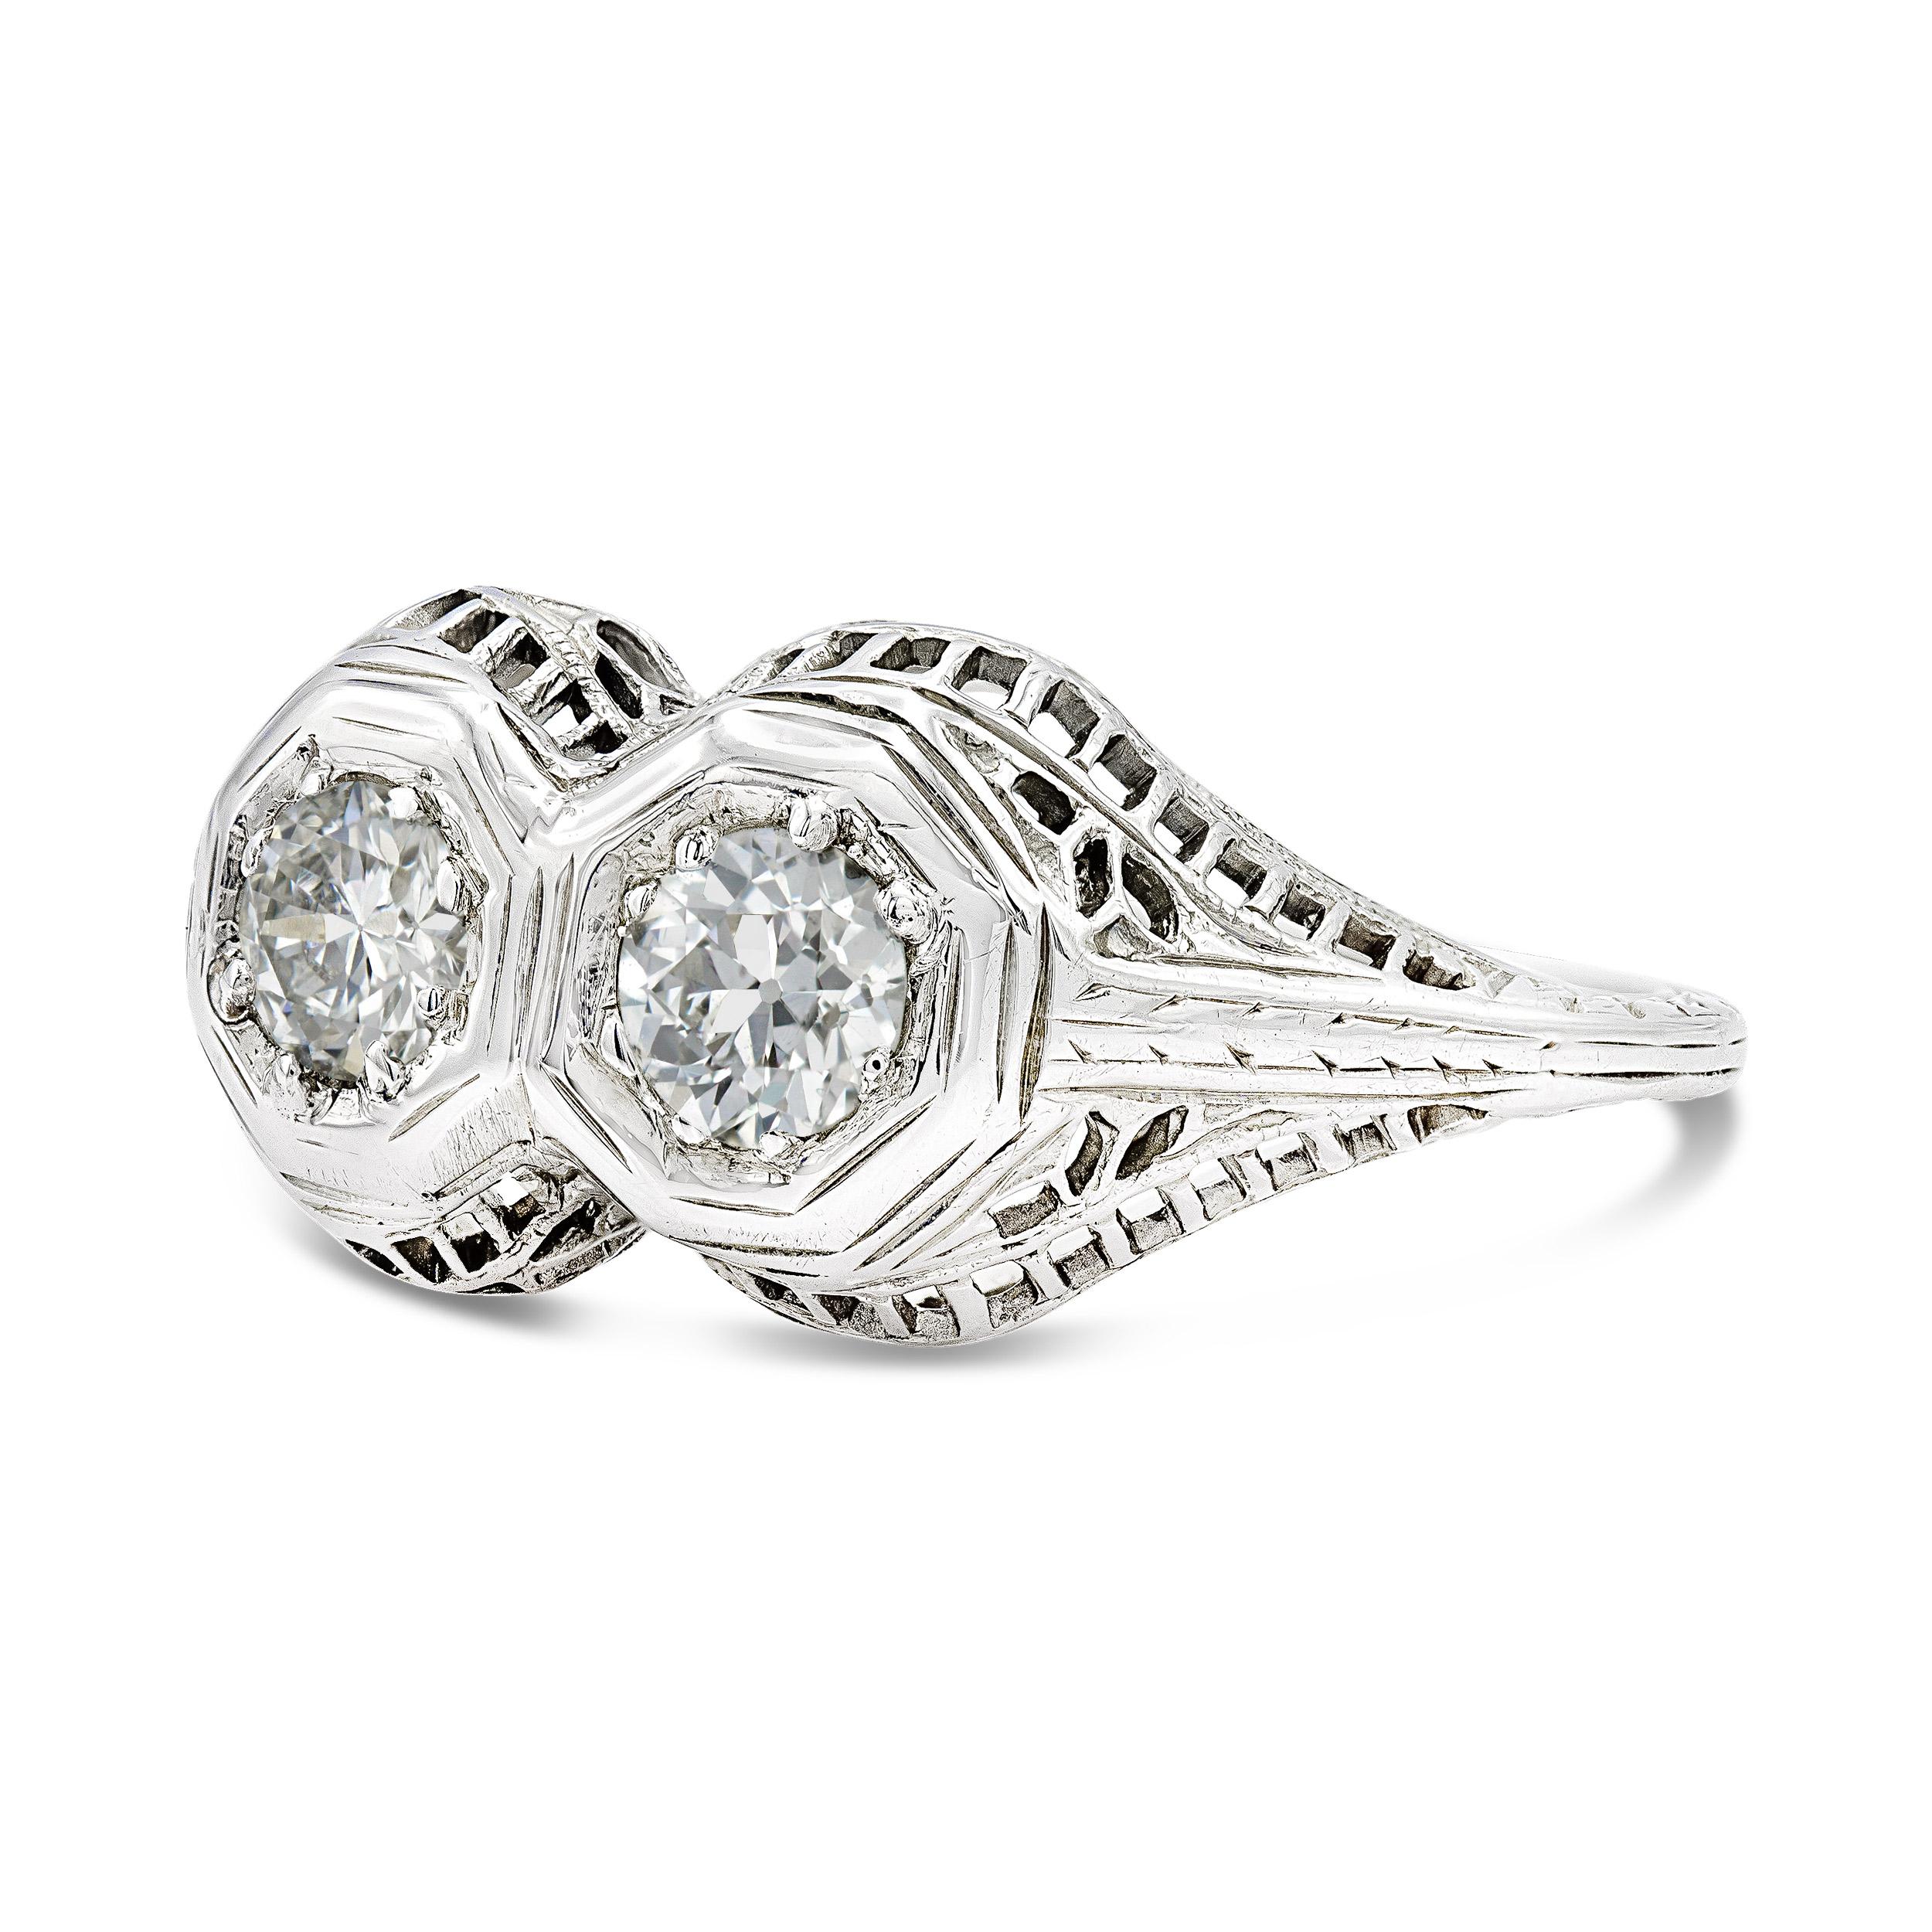 Edwardian era rings are distinguished by intricate filigree and unique accents. This toi-et-moi style ring features twin old European cut diamonds bezel-set and shining brightly. There is so much added intrigue in the metalwork along the gallery and